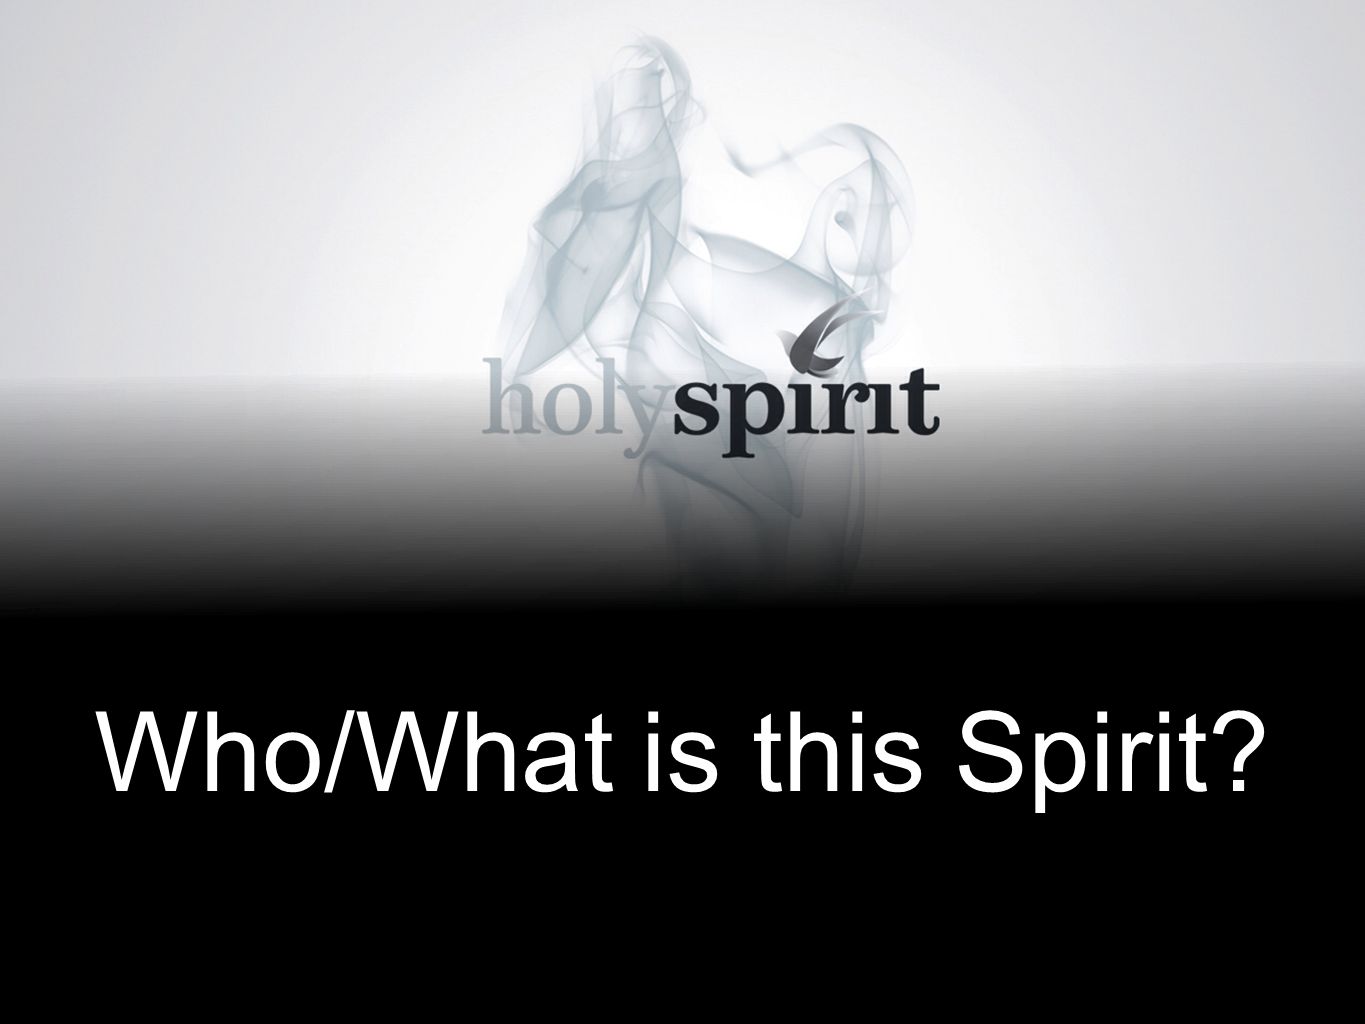 Who/What is this Spirit